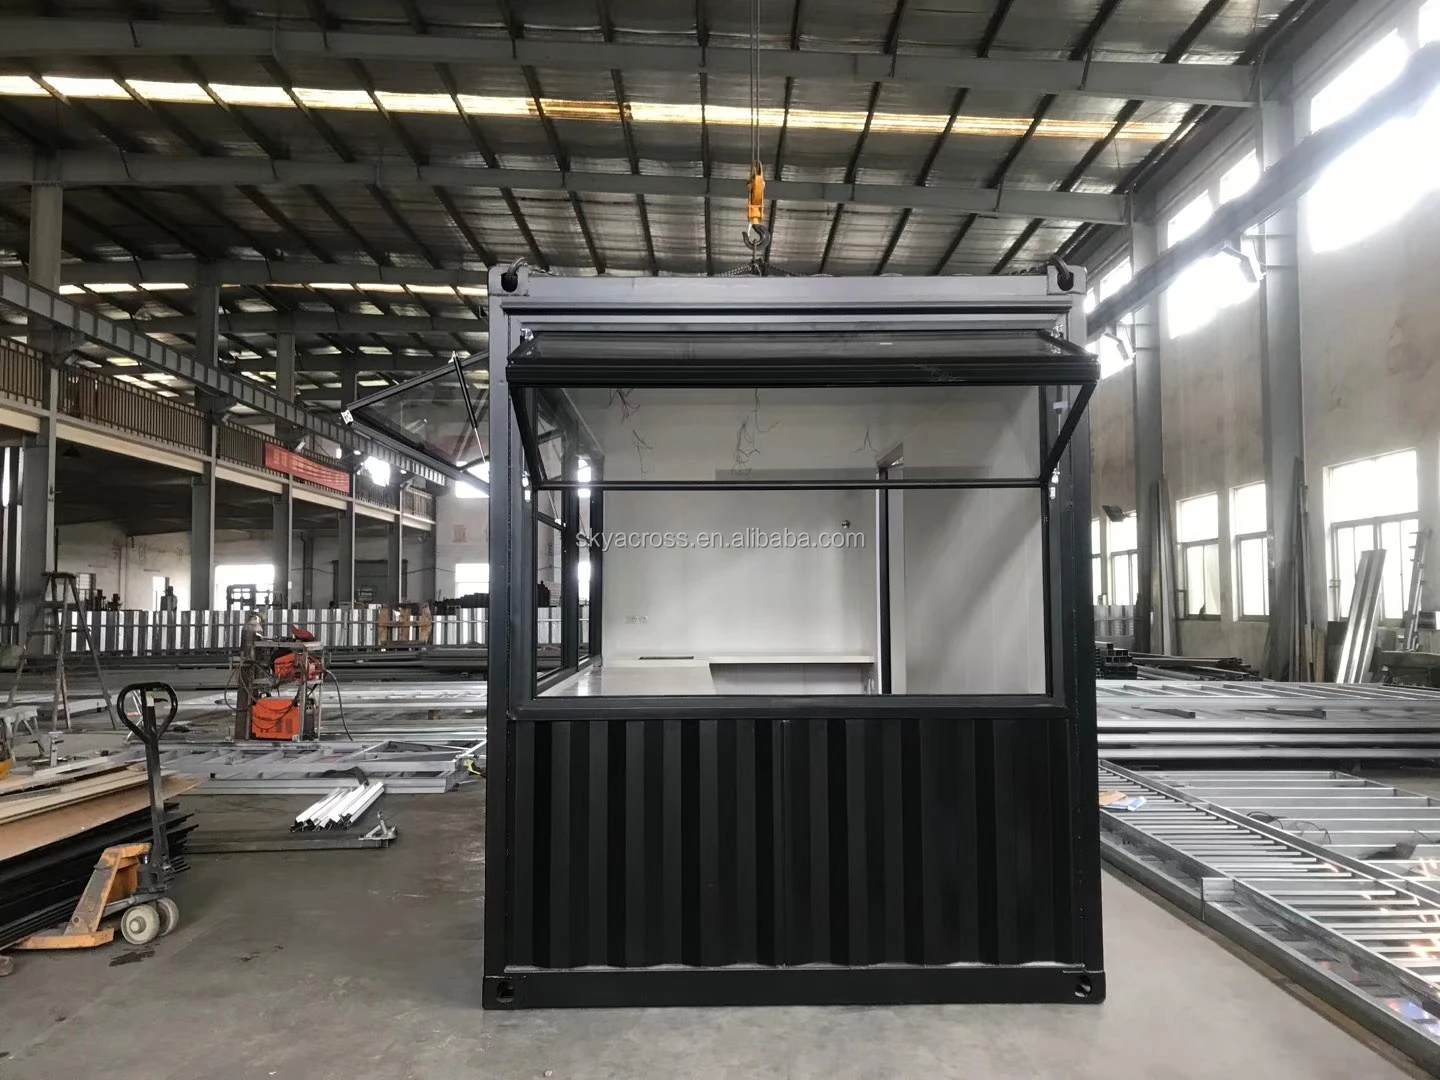 cheap container coffee restaurant bar cafe Kiosk,Booth Use steel prefabricated shipping container store with folding windows